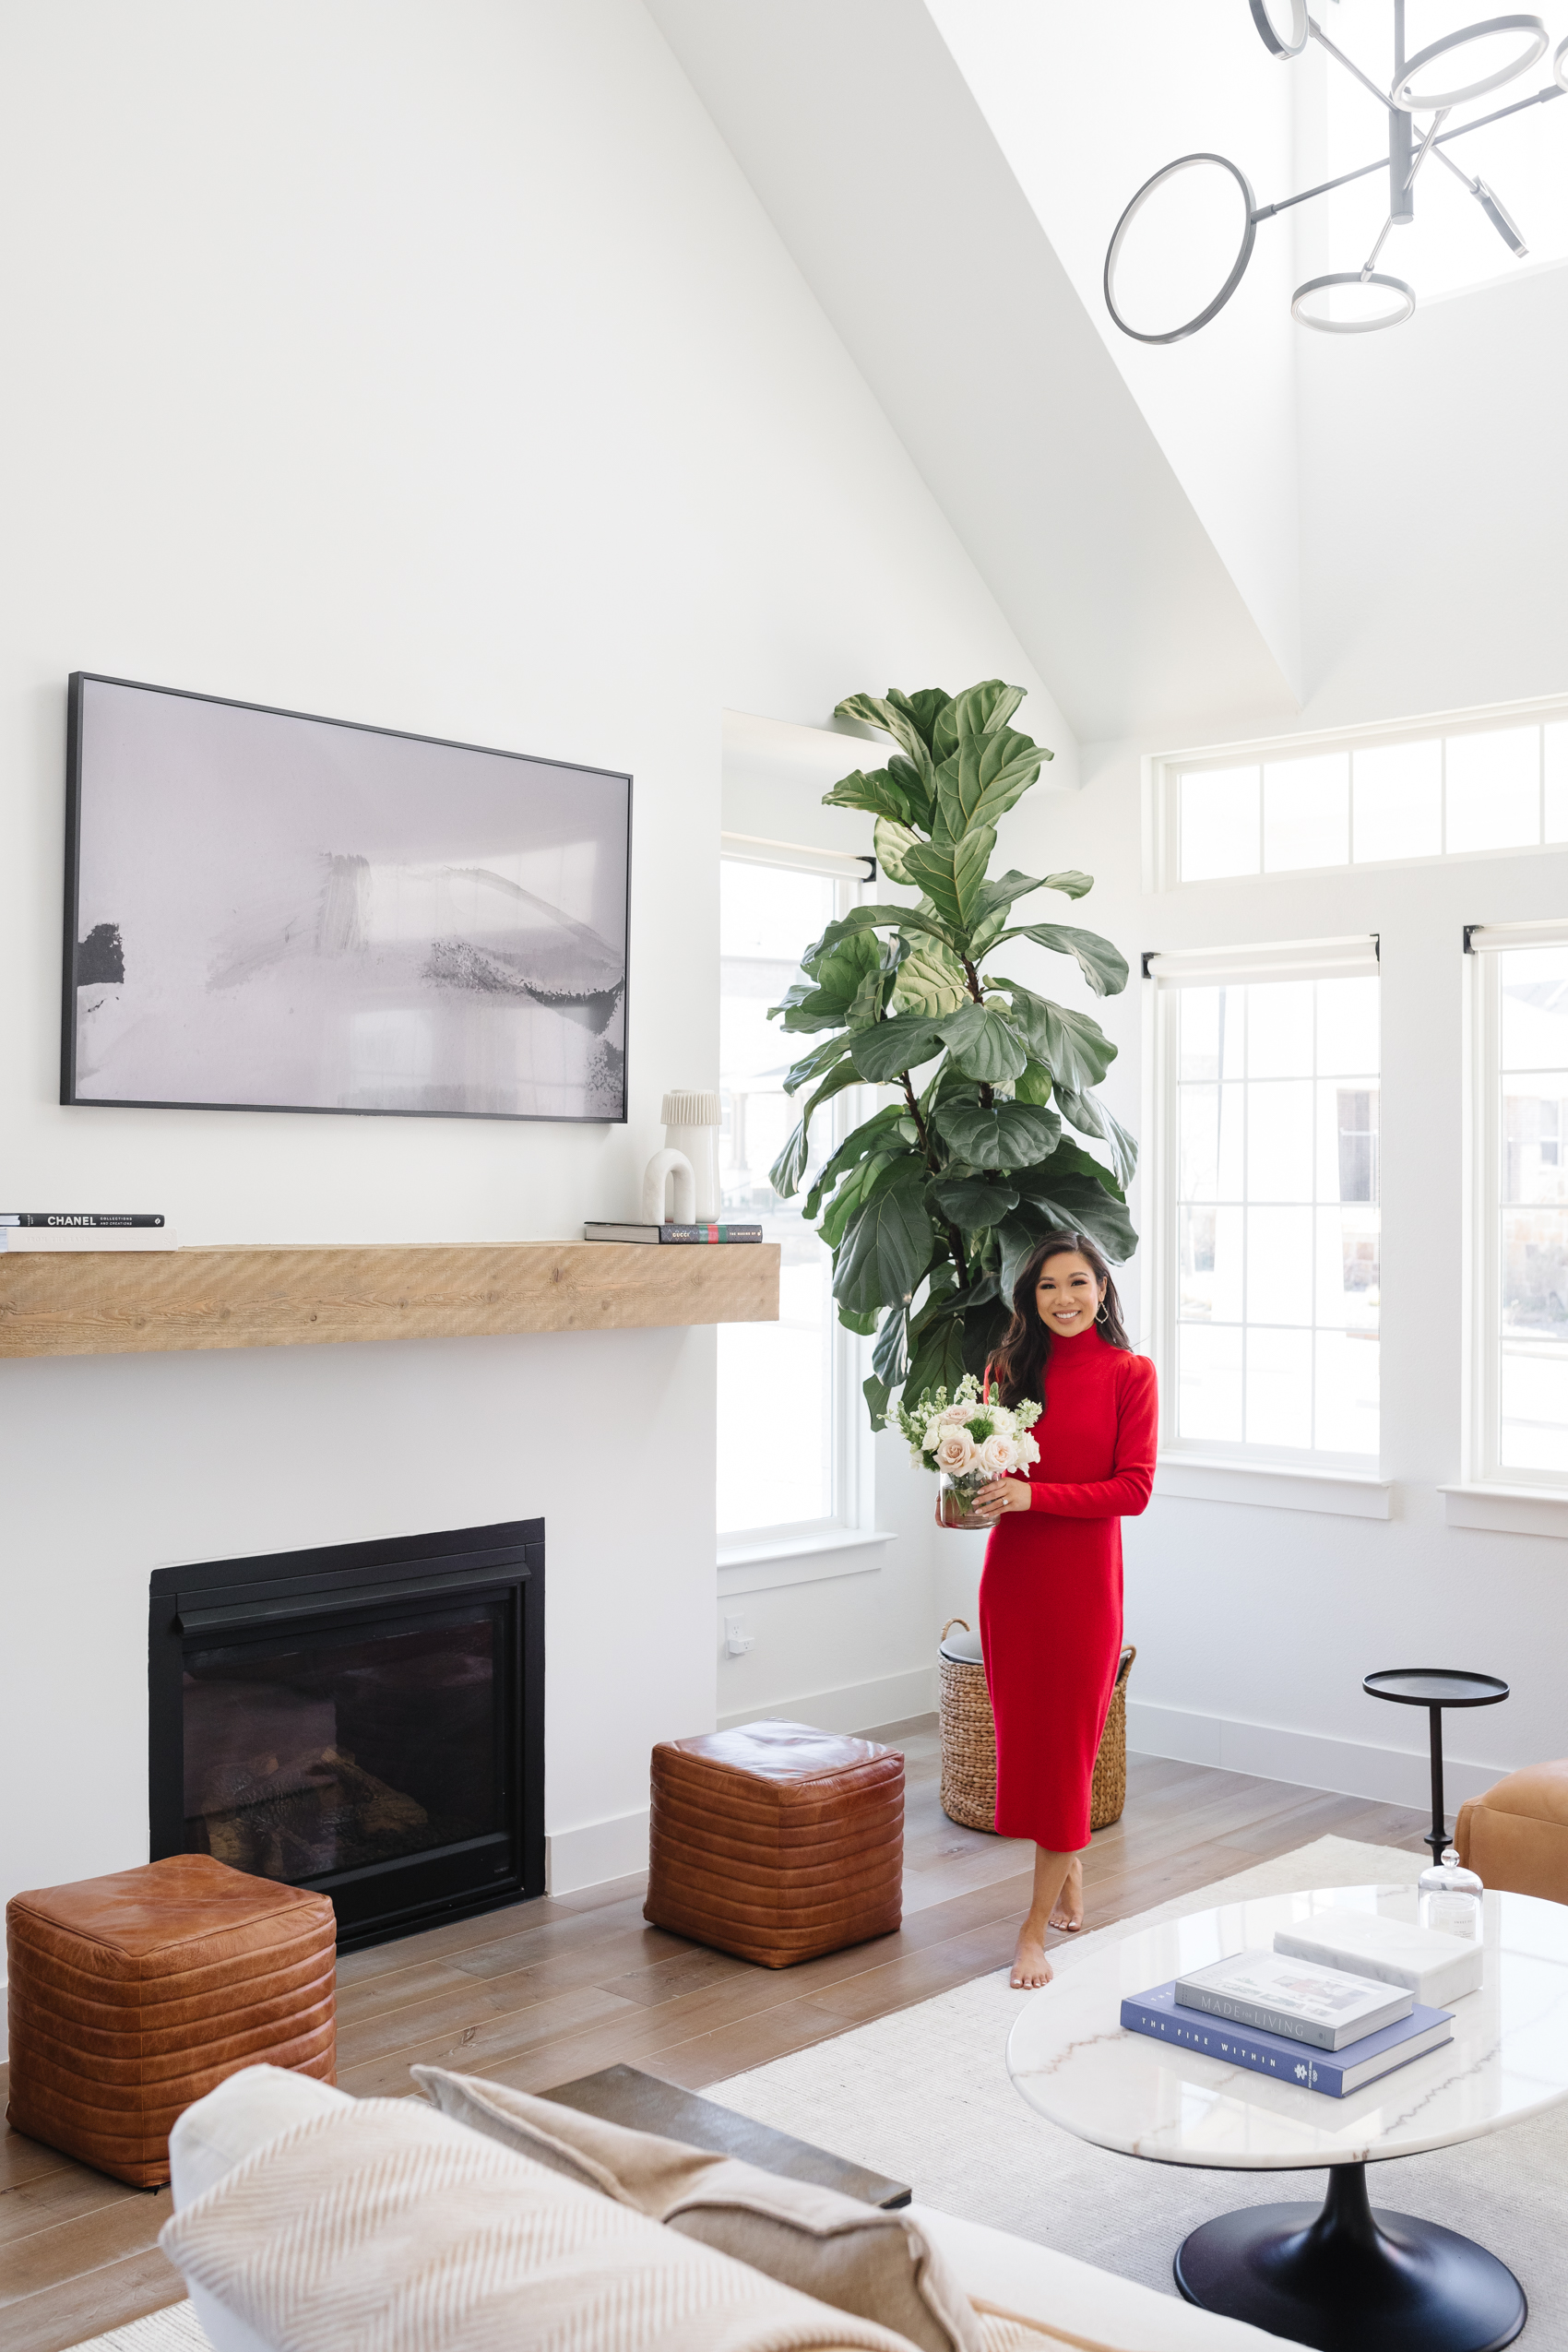 Blogger Hoang-Kim Cung's living room in her transitional style home with a fiddle leaf fig, Samsung Frame TV, Arhaus leather poufs, and Arhaus marble coffee table